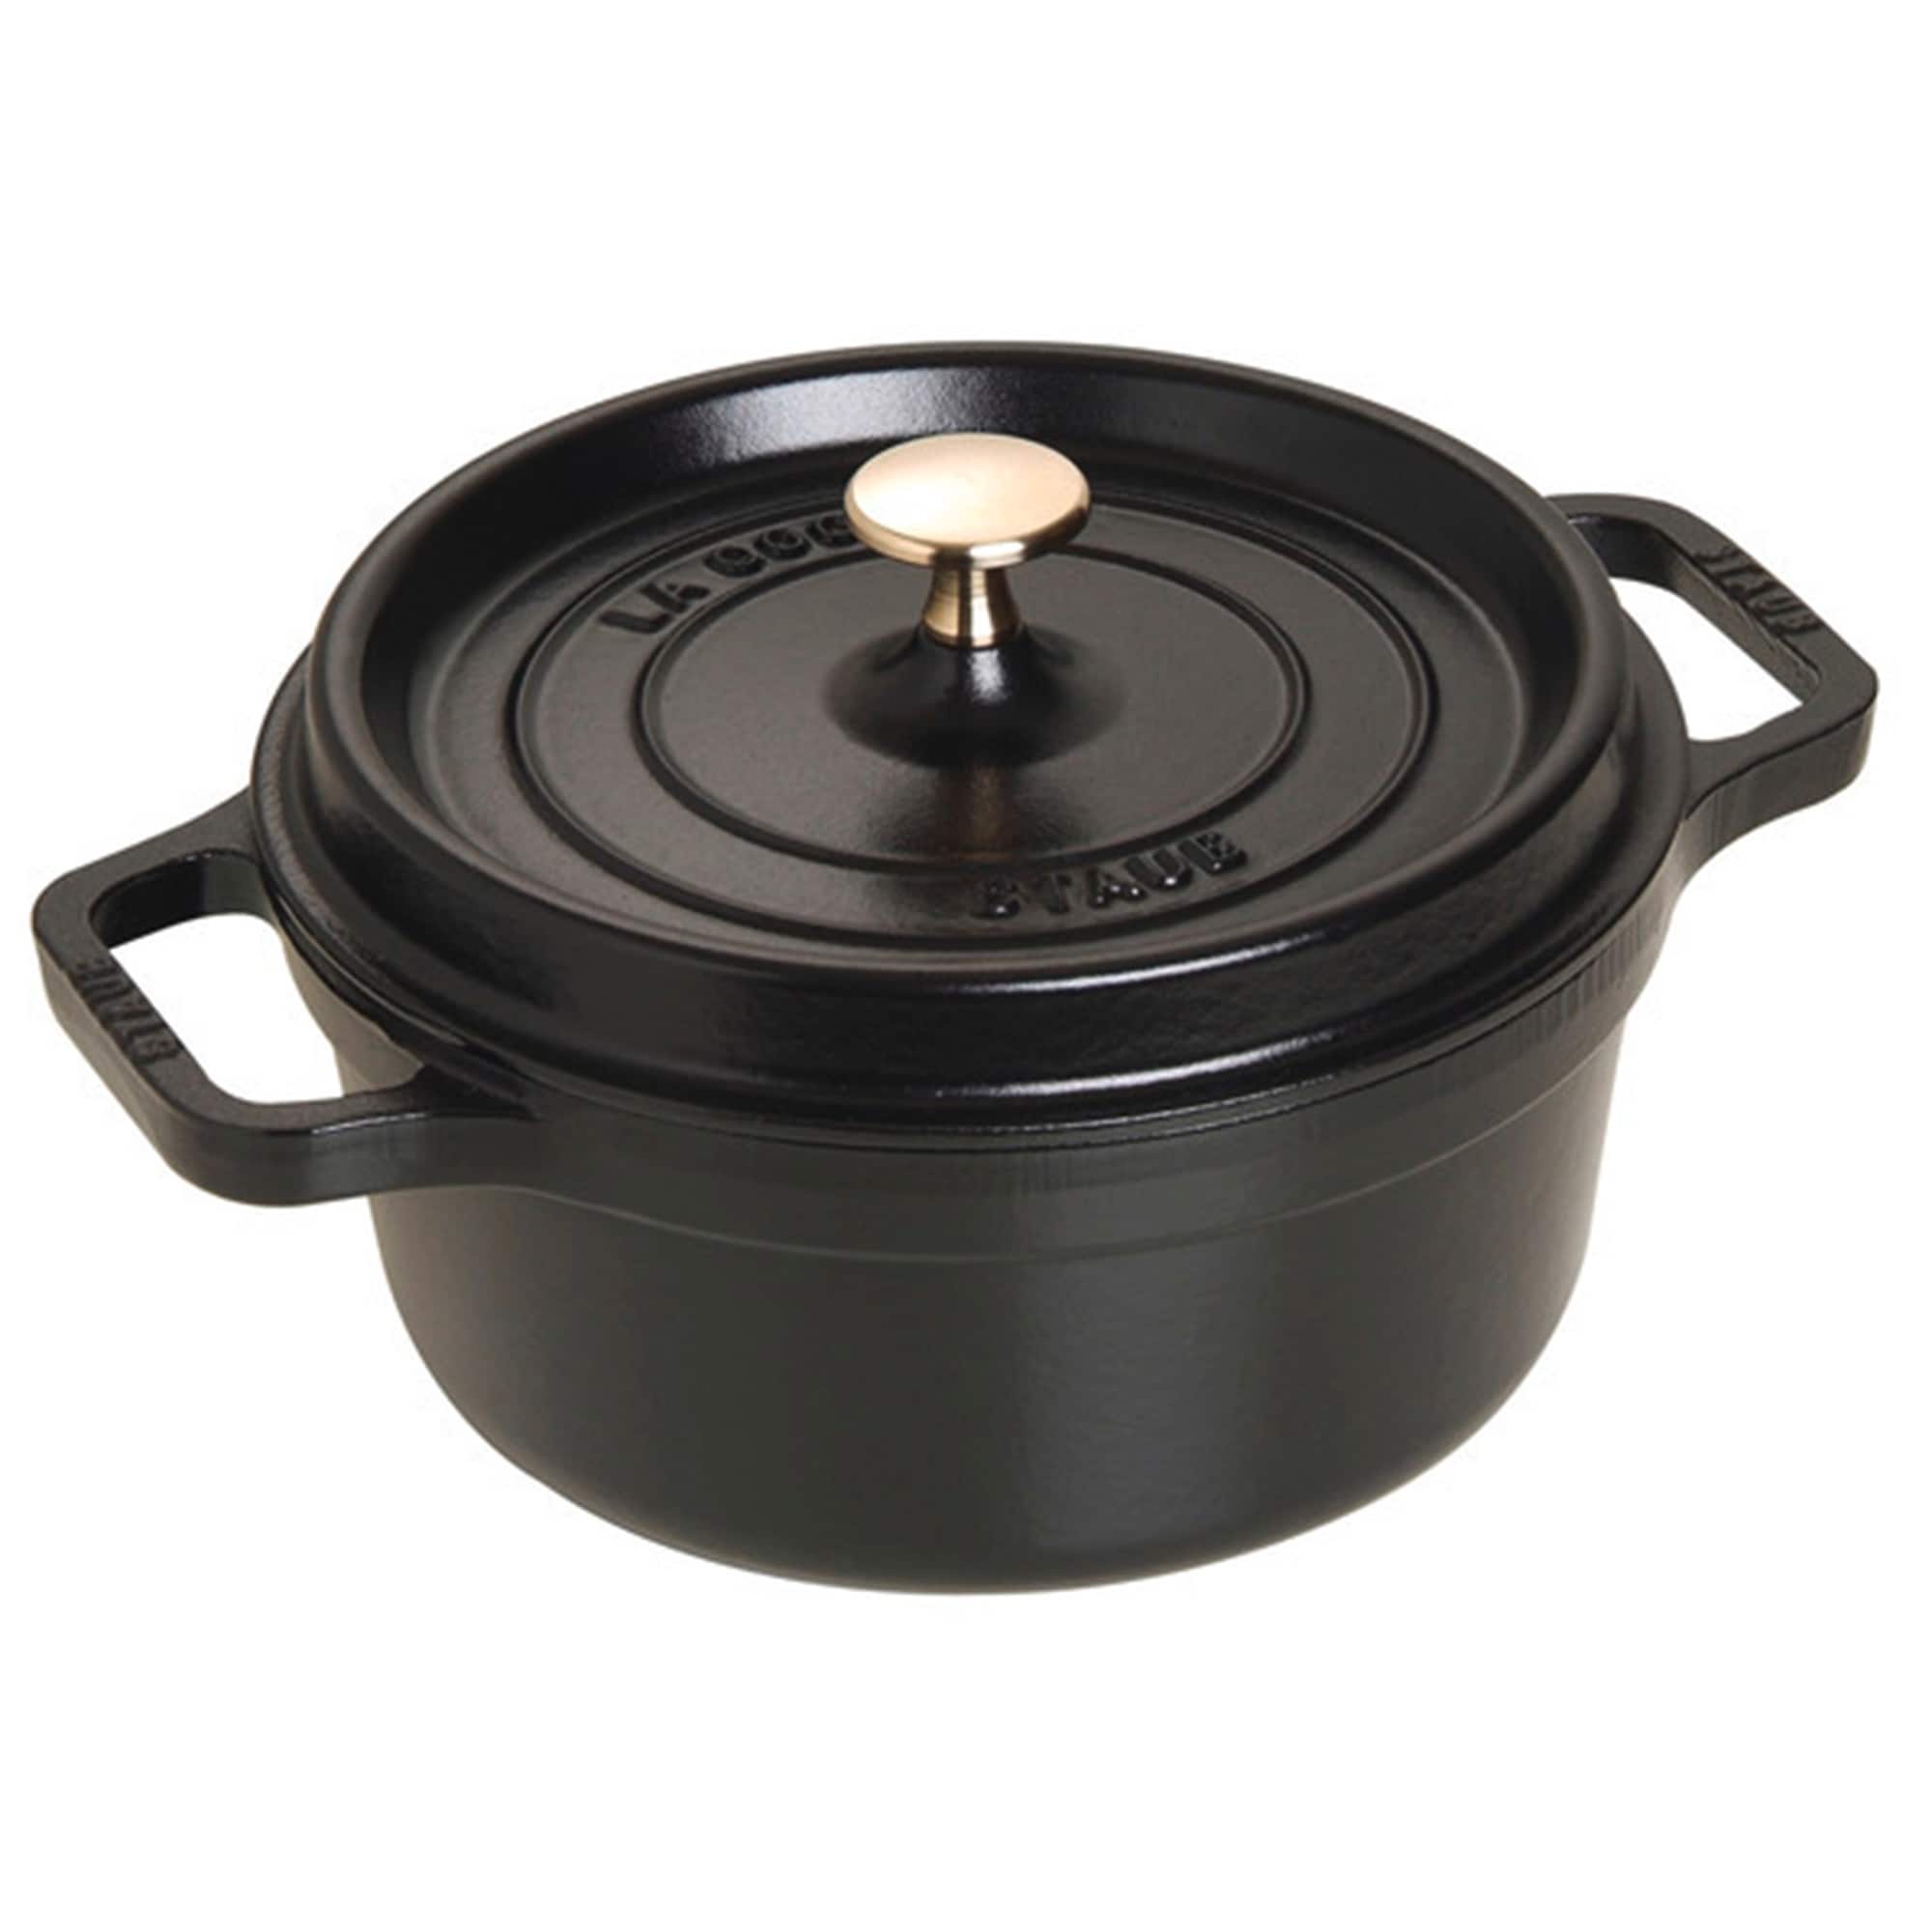 https://ak1.ostkcdn.com/images/products/is/images/direct/c5bf4f5a1c48e4dd00b71fa169d4cc5db09ee94b/STAUB-Cast-Iron-2.75-qt-Round-Cocotte.jpg